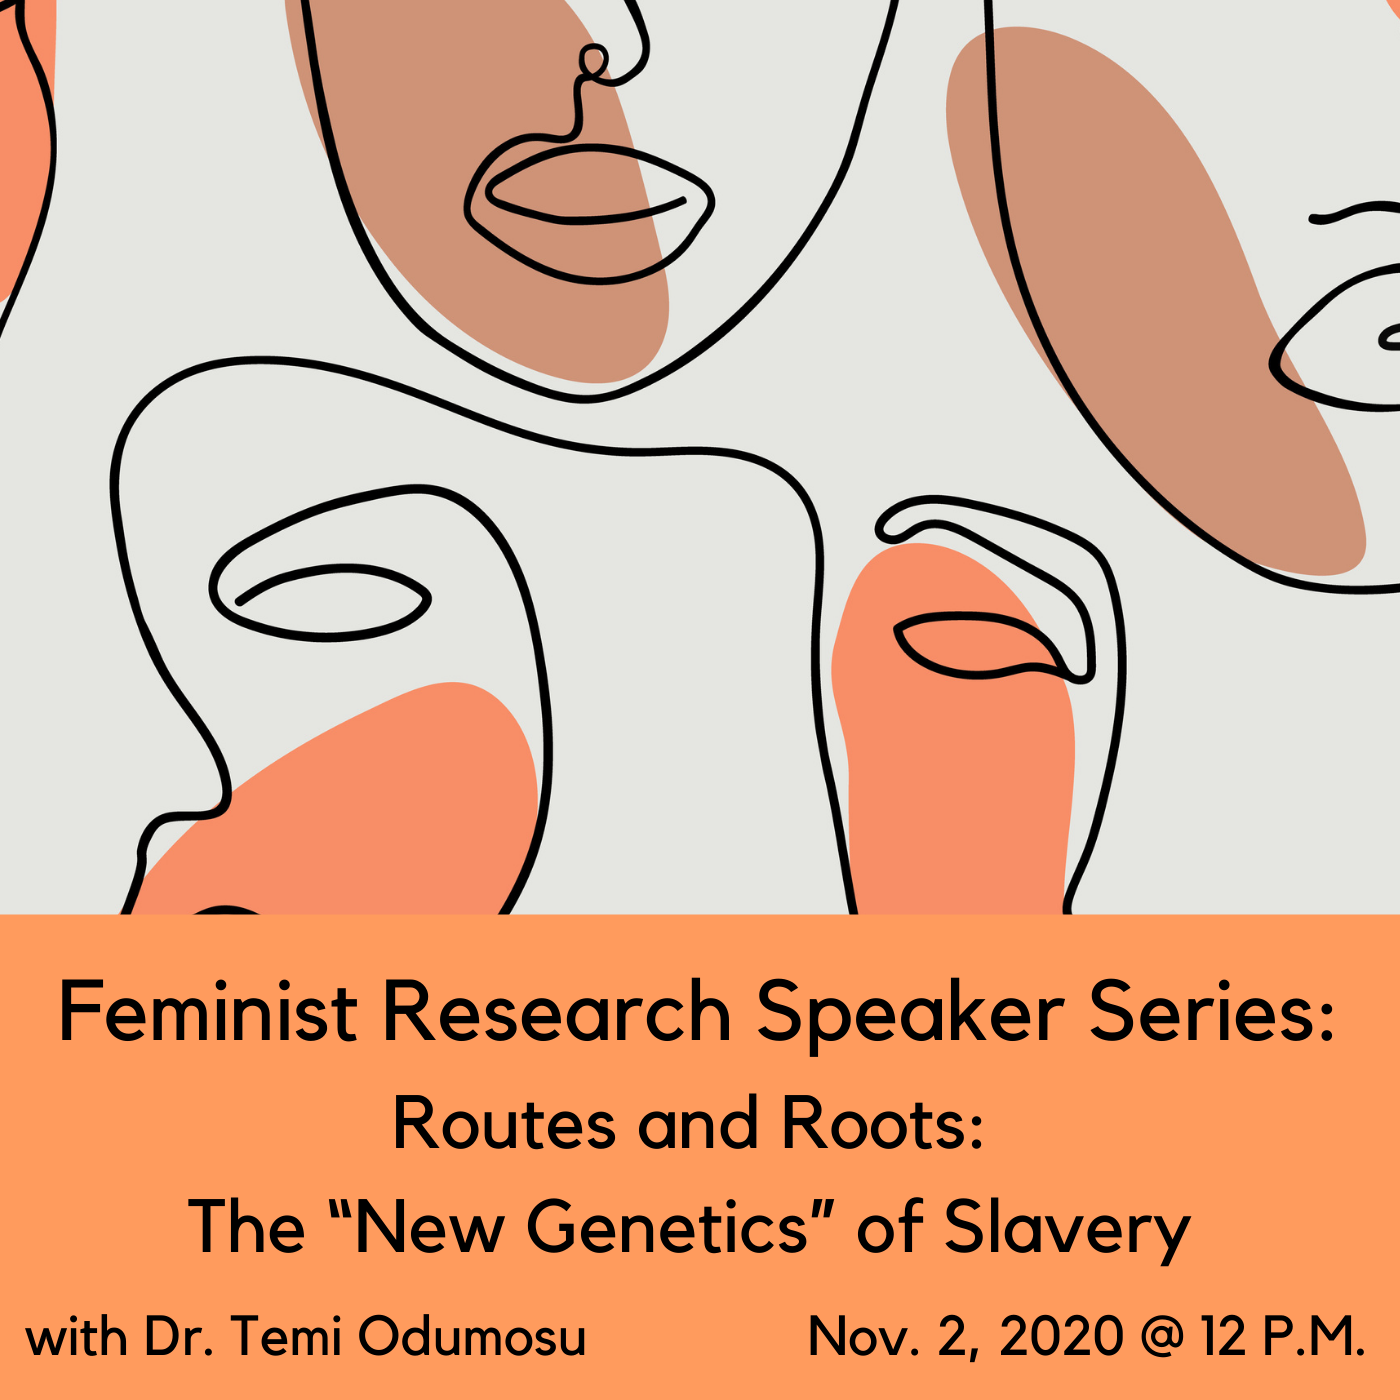 Feminist Research Speaker Series 2nd event